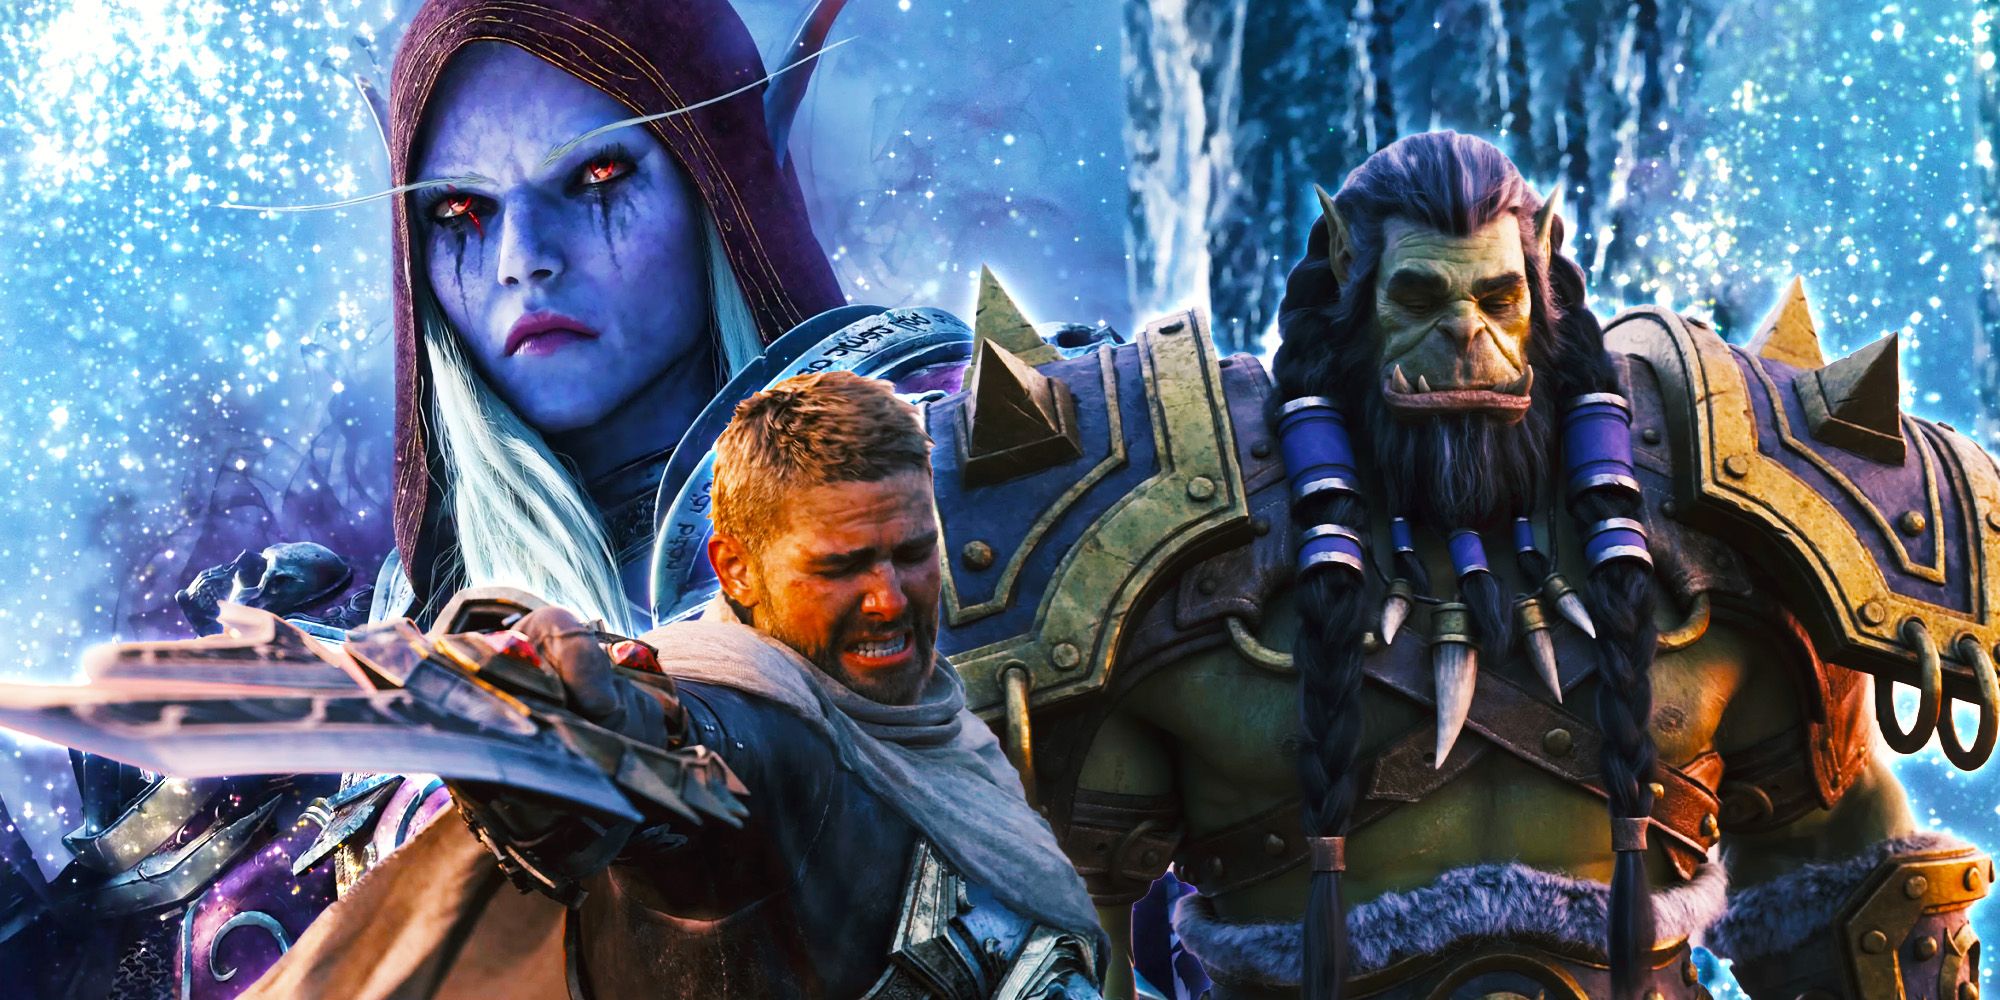 Three World of Warcraft characters - a void elf, a human, and an orc - in front of an icy background.